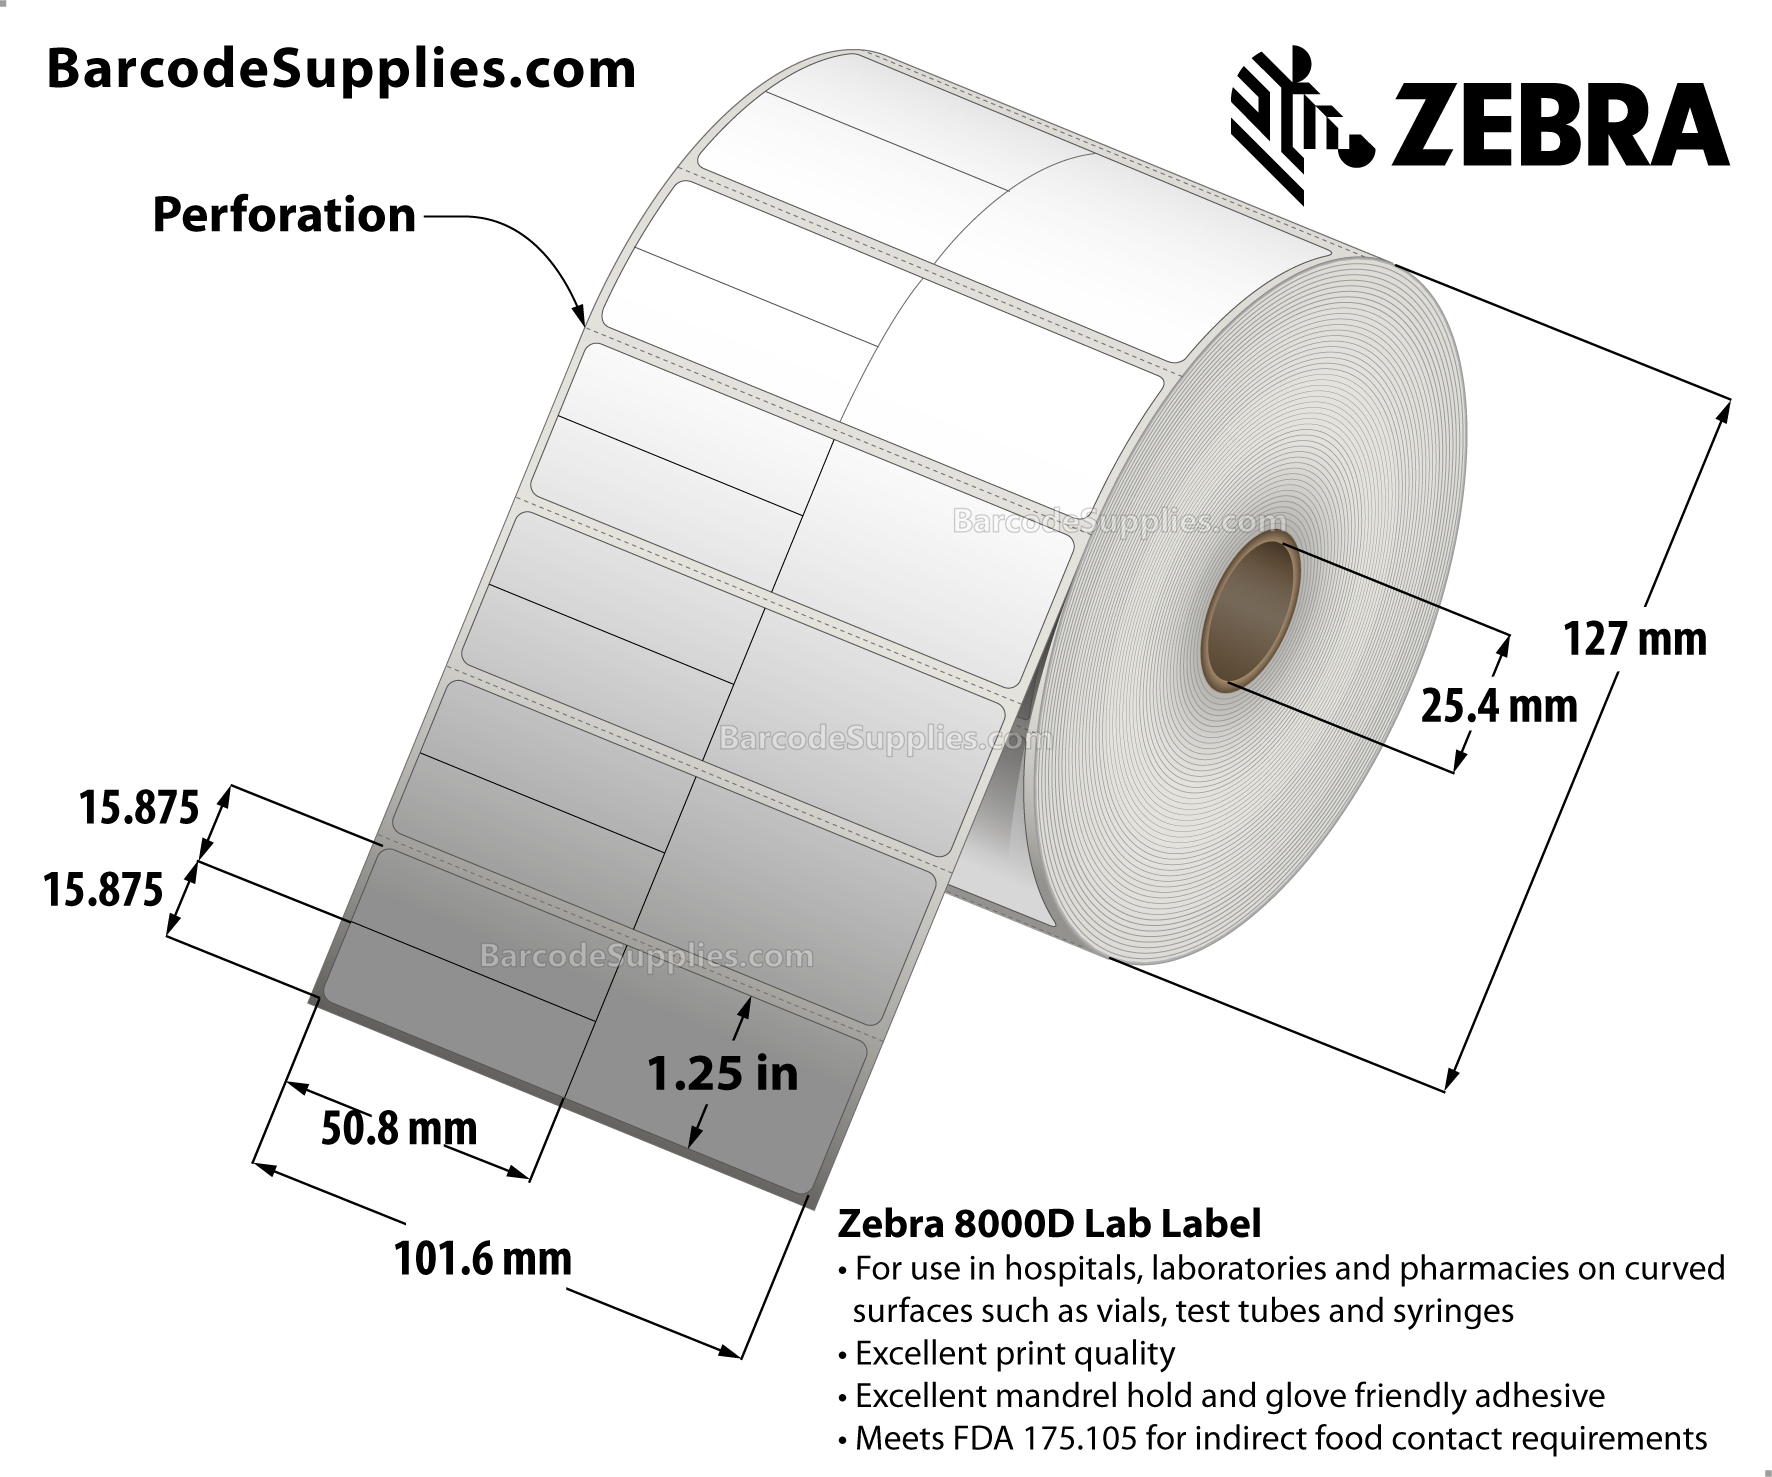 4 x 1.25 Direct Thermal White 8000D Lab Labels With Permanent Adhesive - Perforated - 1911 Labels Per Roll - Carton Of 6 Rolls - 11466 Labels Total - MPN: 10018357